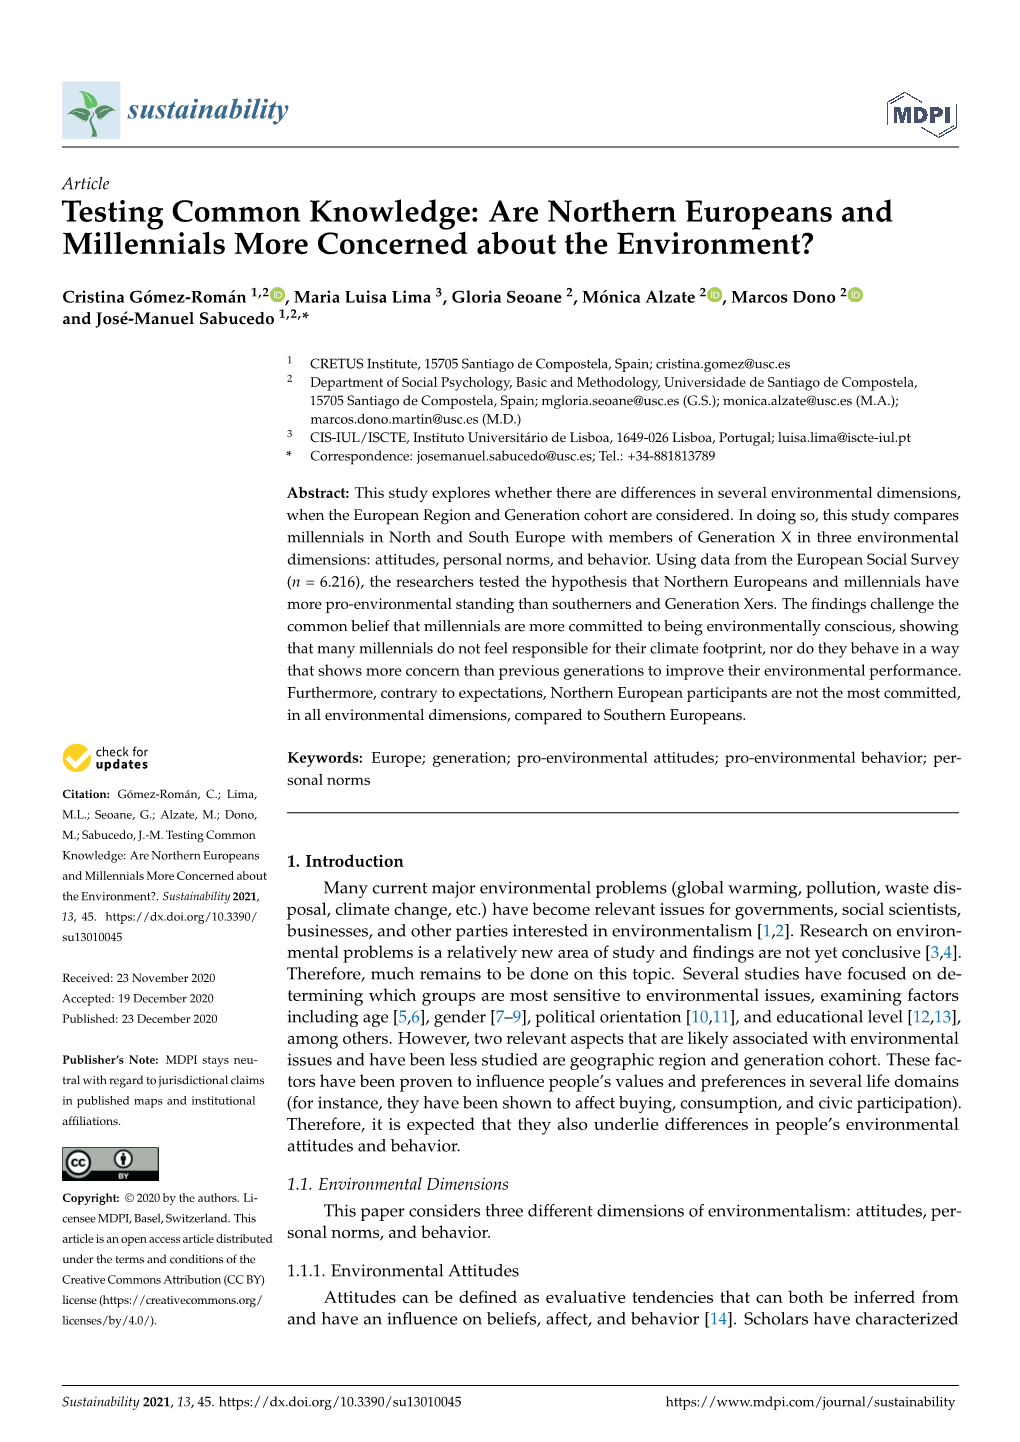 Testing Common Knowledge: Are Northern Europeans and Millennials More Concerned About the Environment?